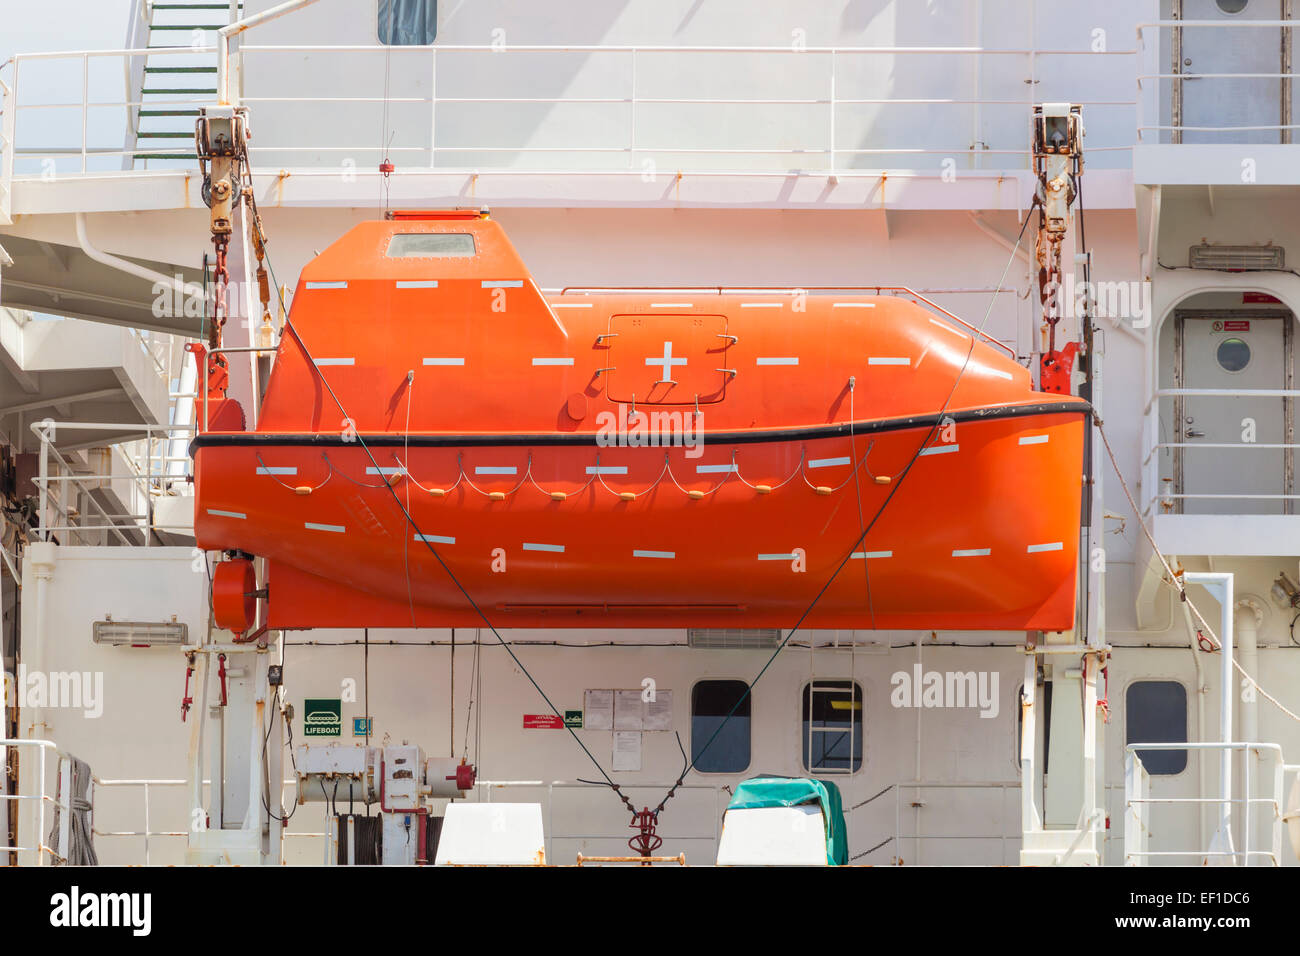 Totally enclosed lifeboat on a cargo ship Stock Photo